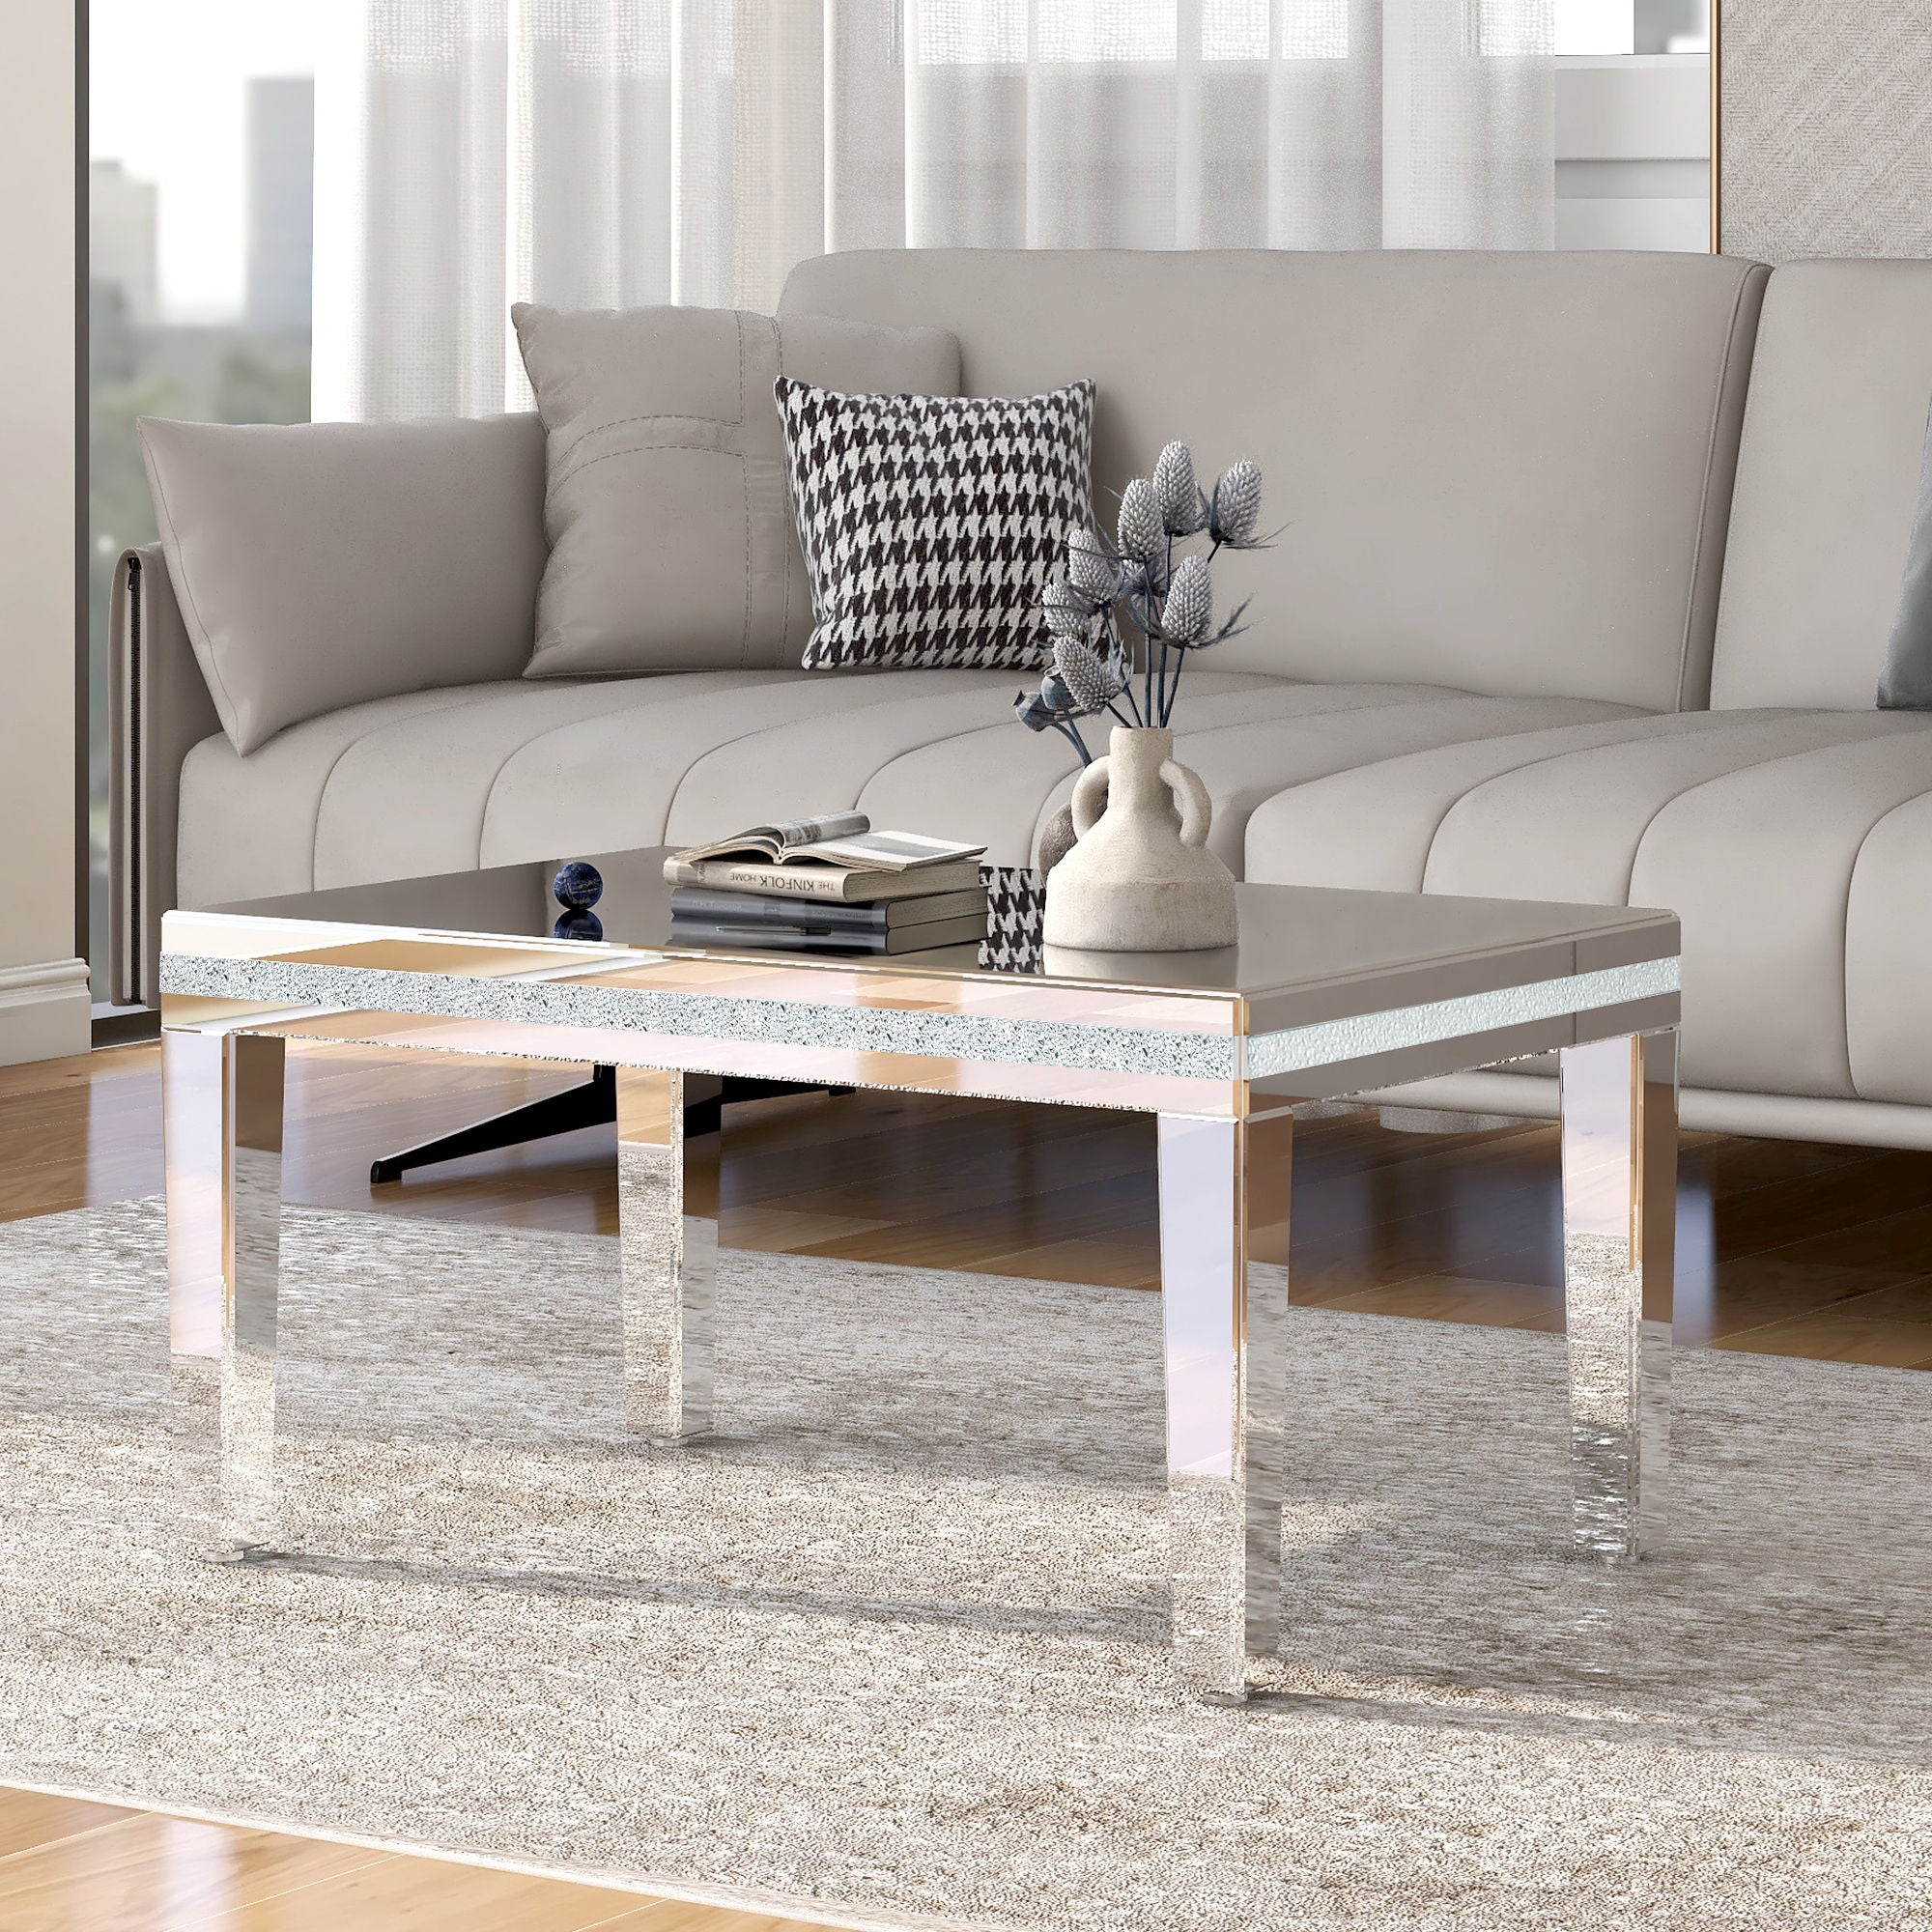 On-Trend Fashionable Modern Glass Mirrored Coffee Table, Easy Assembly Cocktail Table With Crystal Design And Adjustable Height Legs, Silver